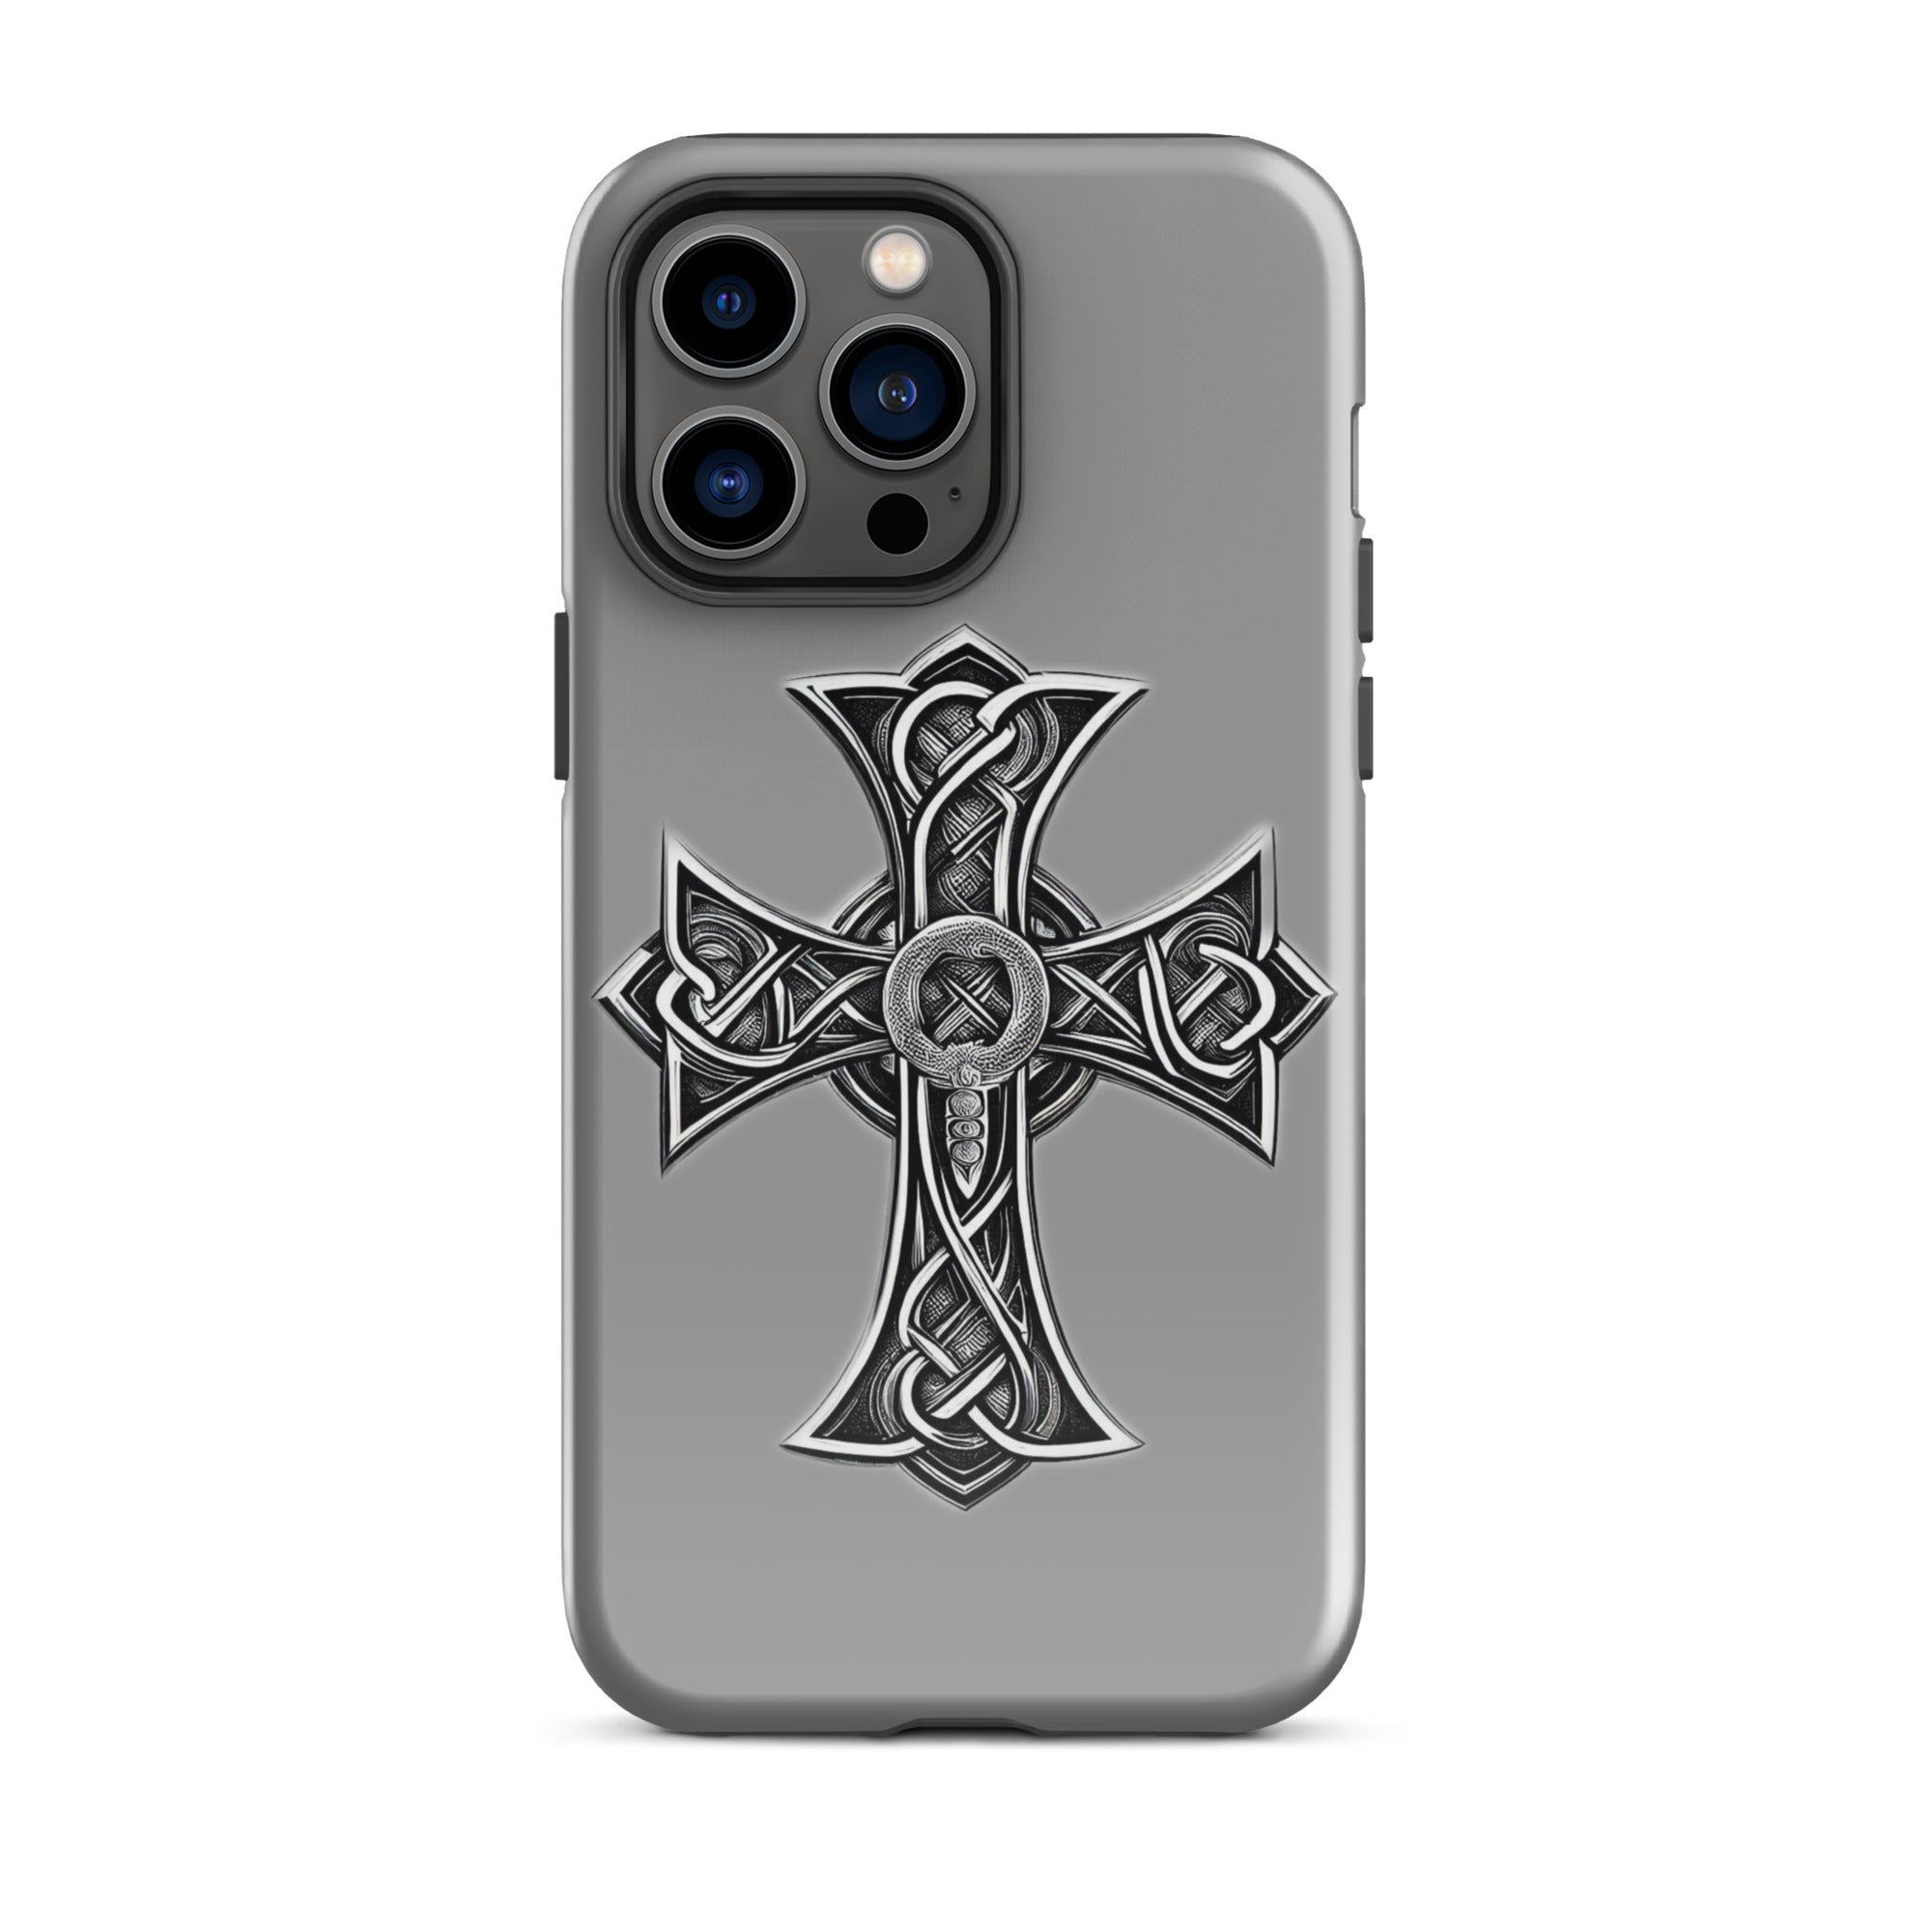 tough-case-for-iphone-glossy-iphone-14-pro-max-front-65638477144b8.jpg